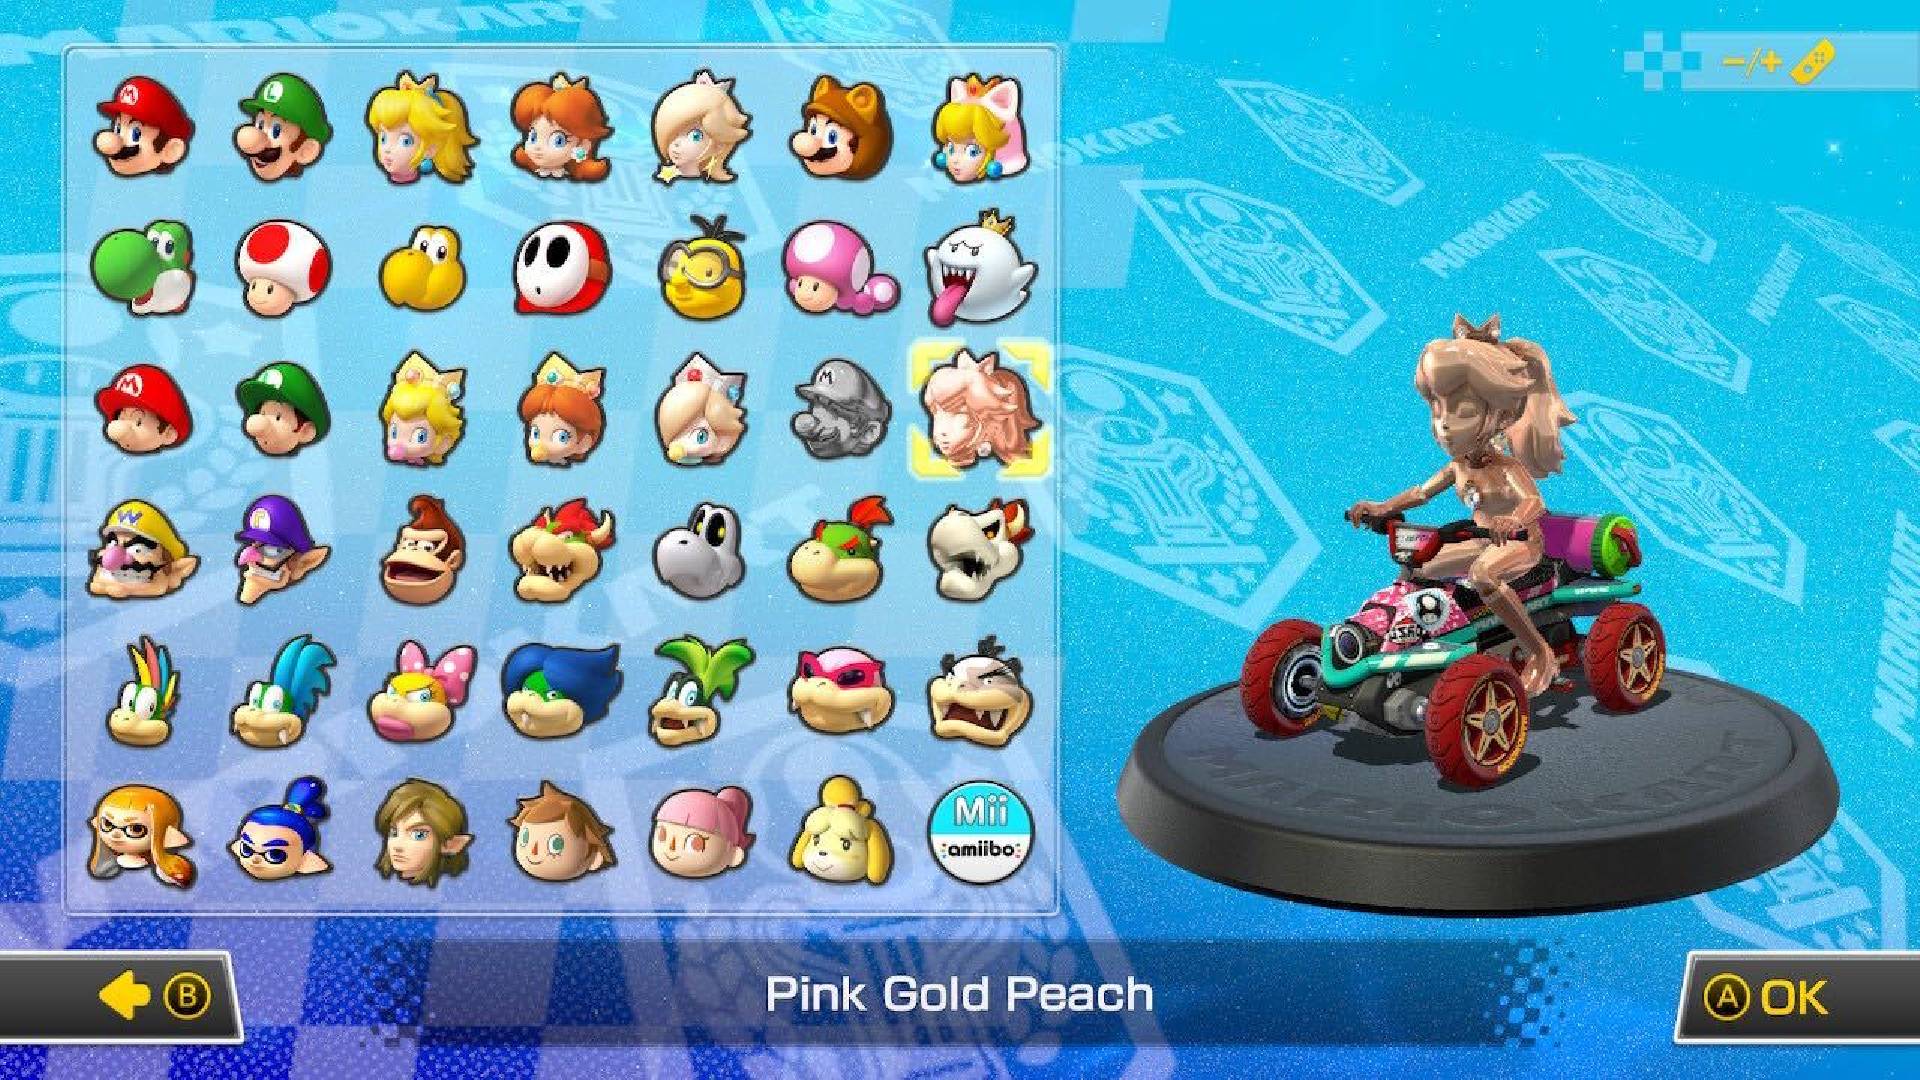 Pink Gold Peach is visible on a character selection screen, sitting in a kart